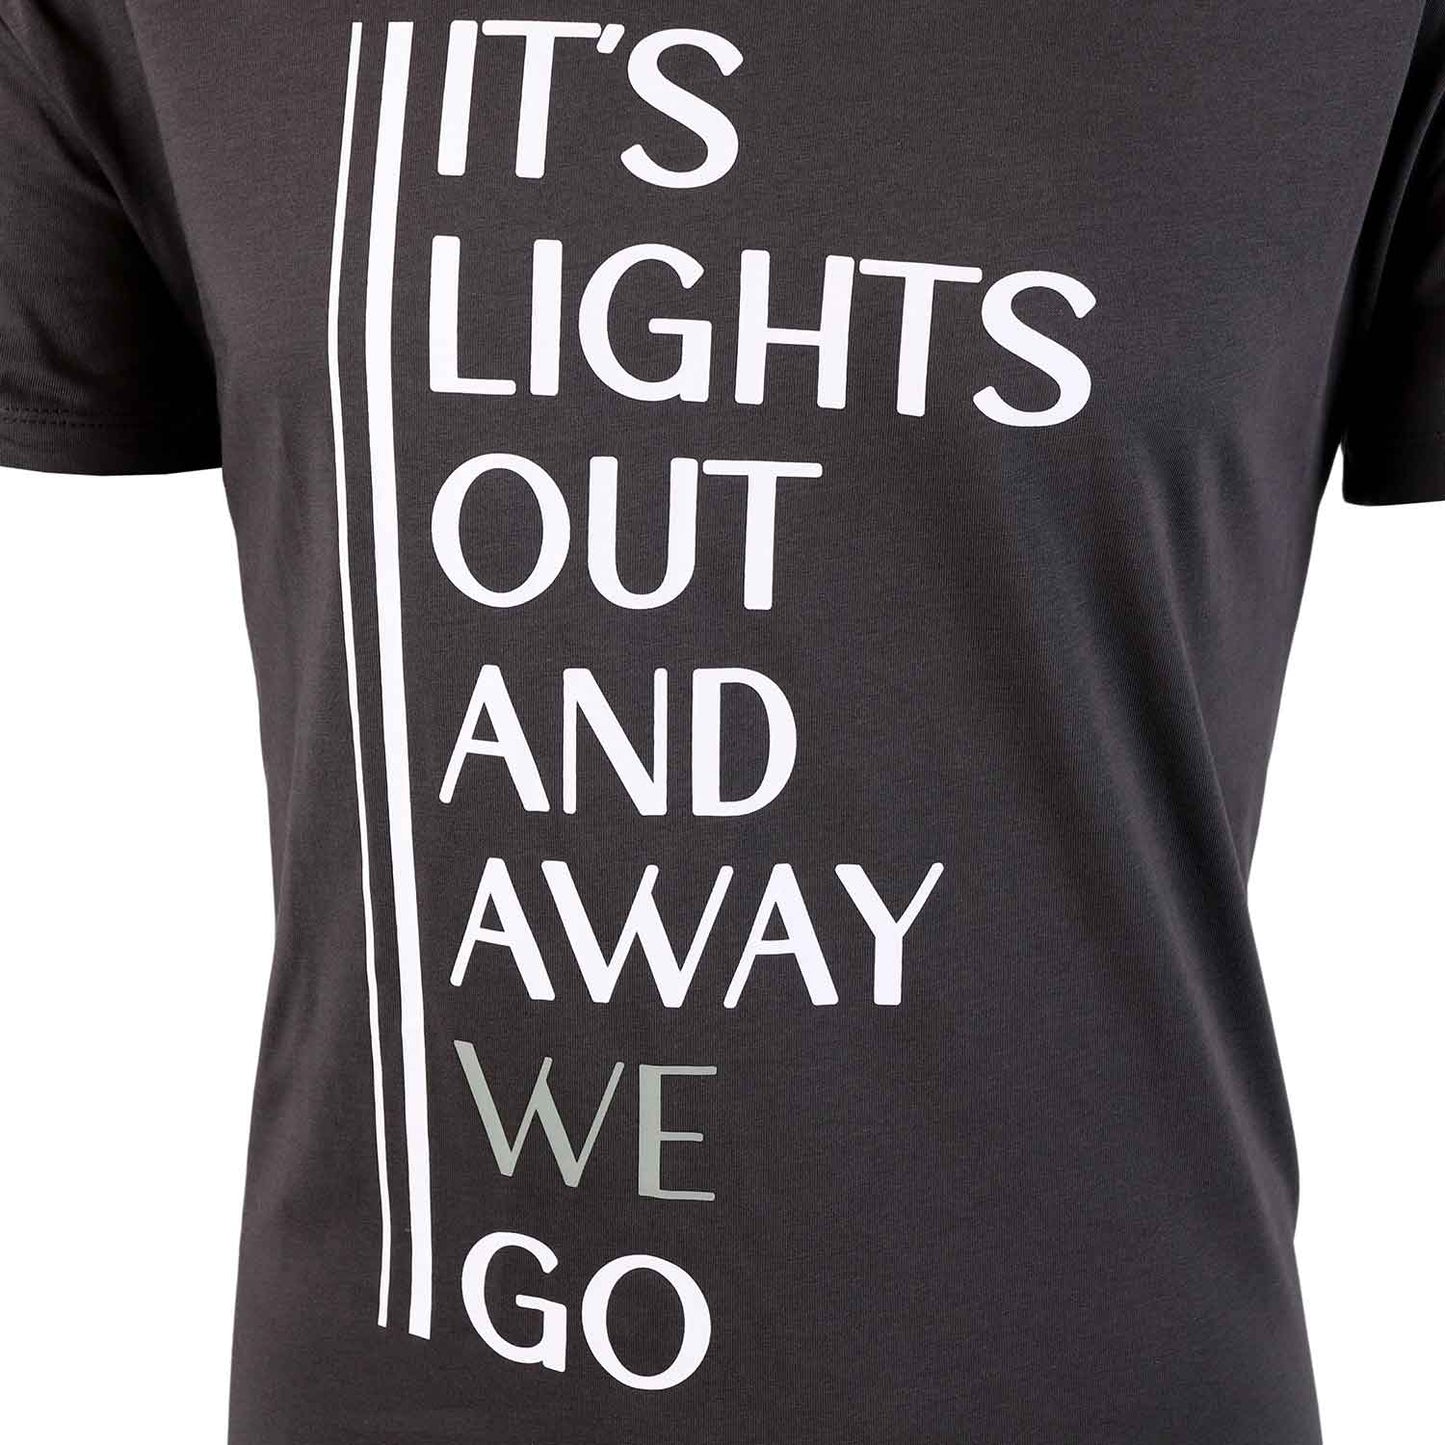 It's Lights Out and Away We Go T Shirt - Formula 1 T-Shirt - F1